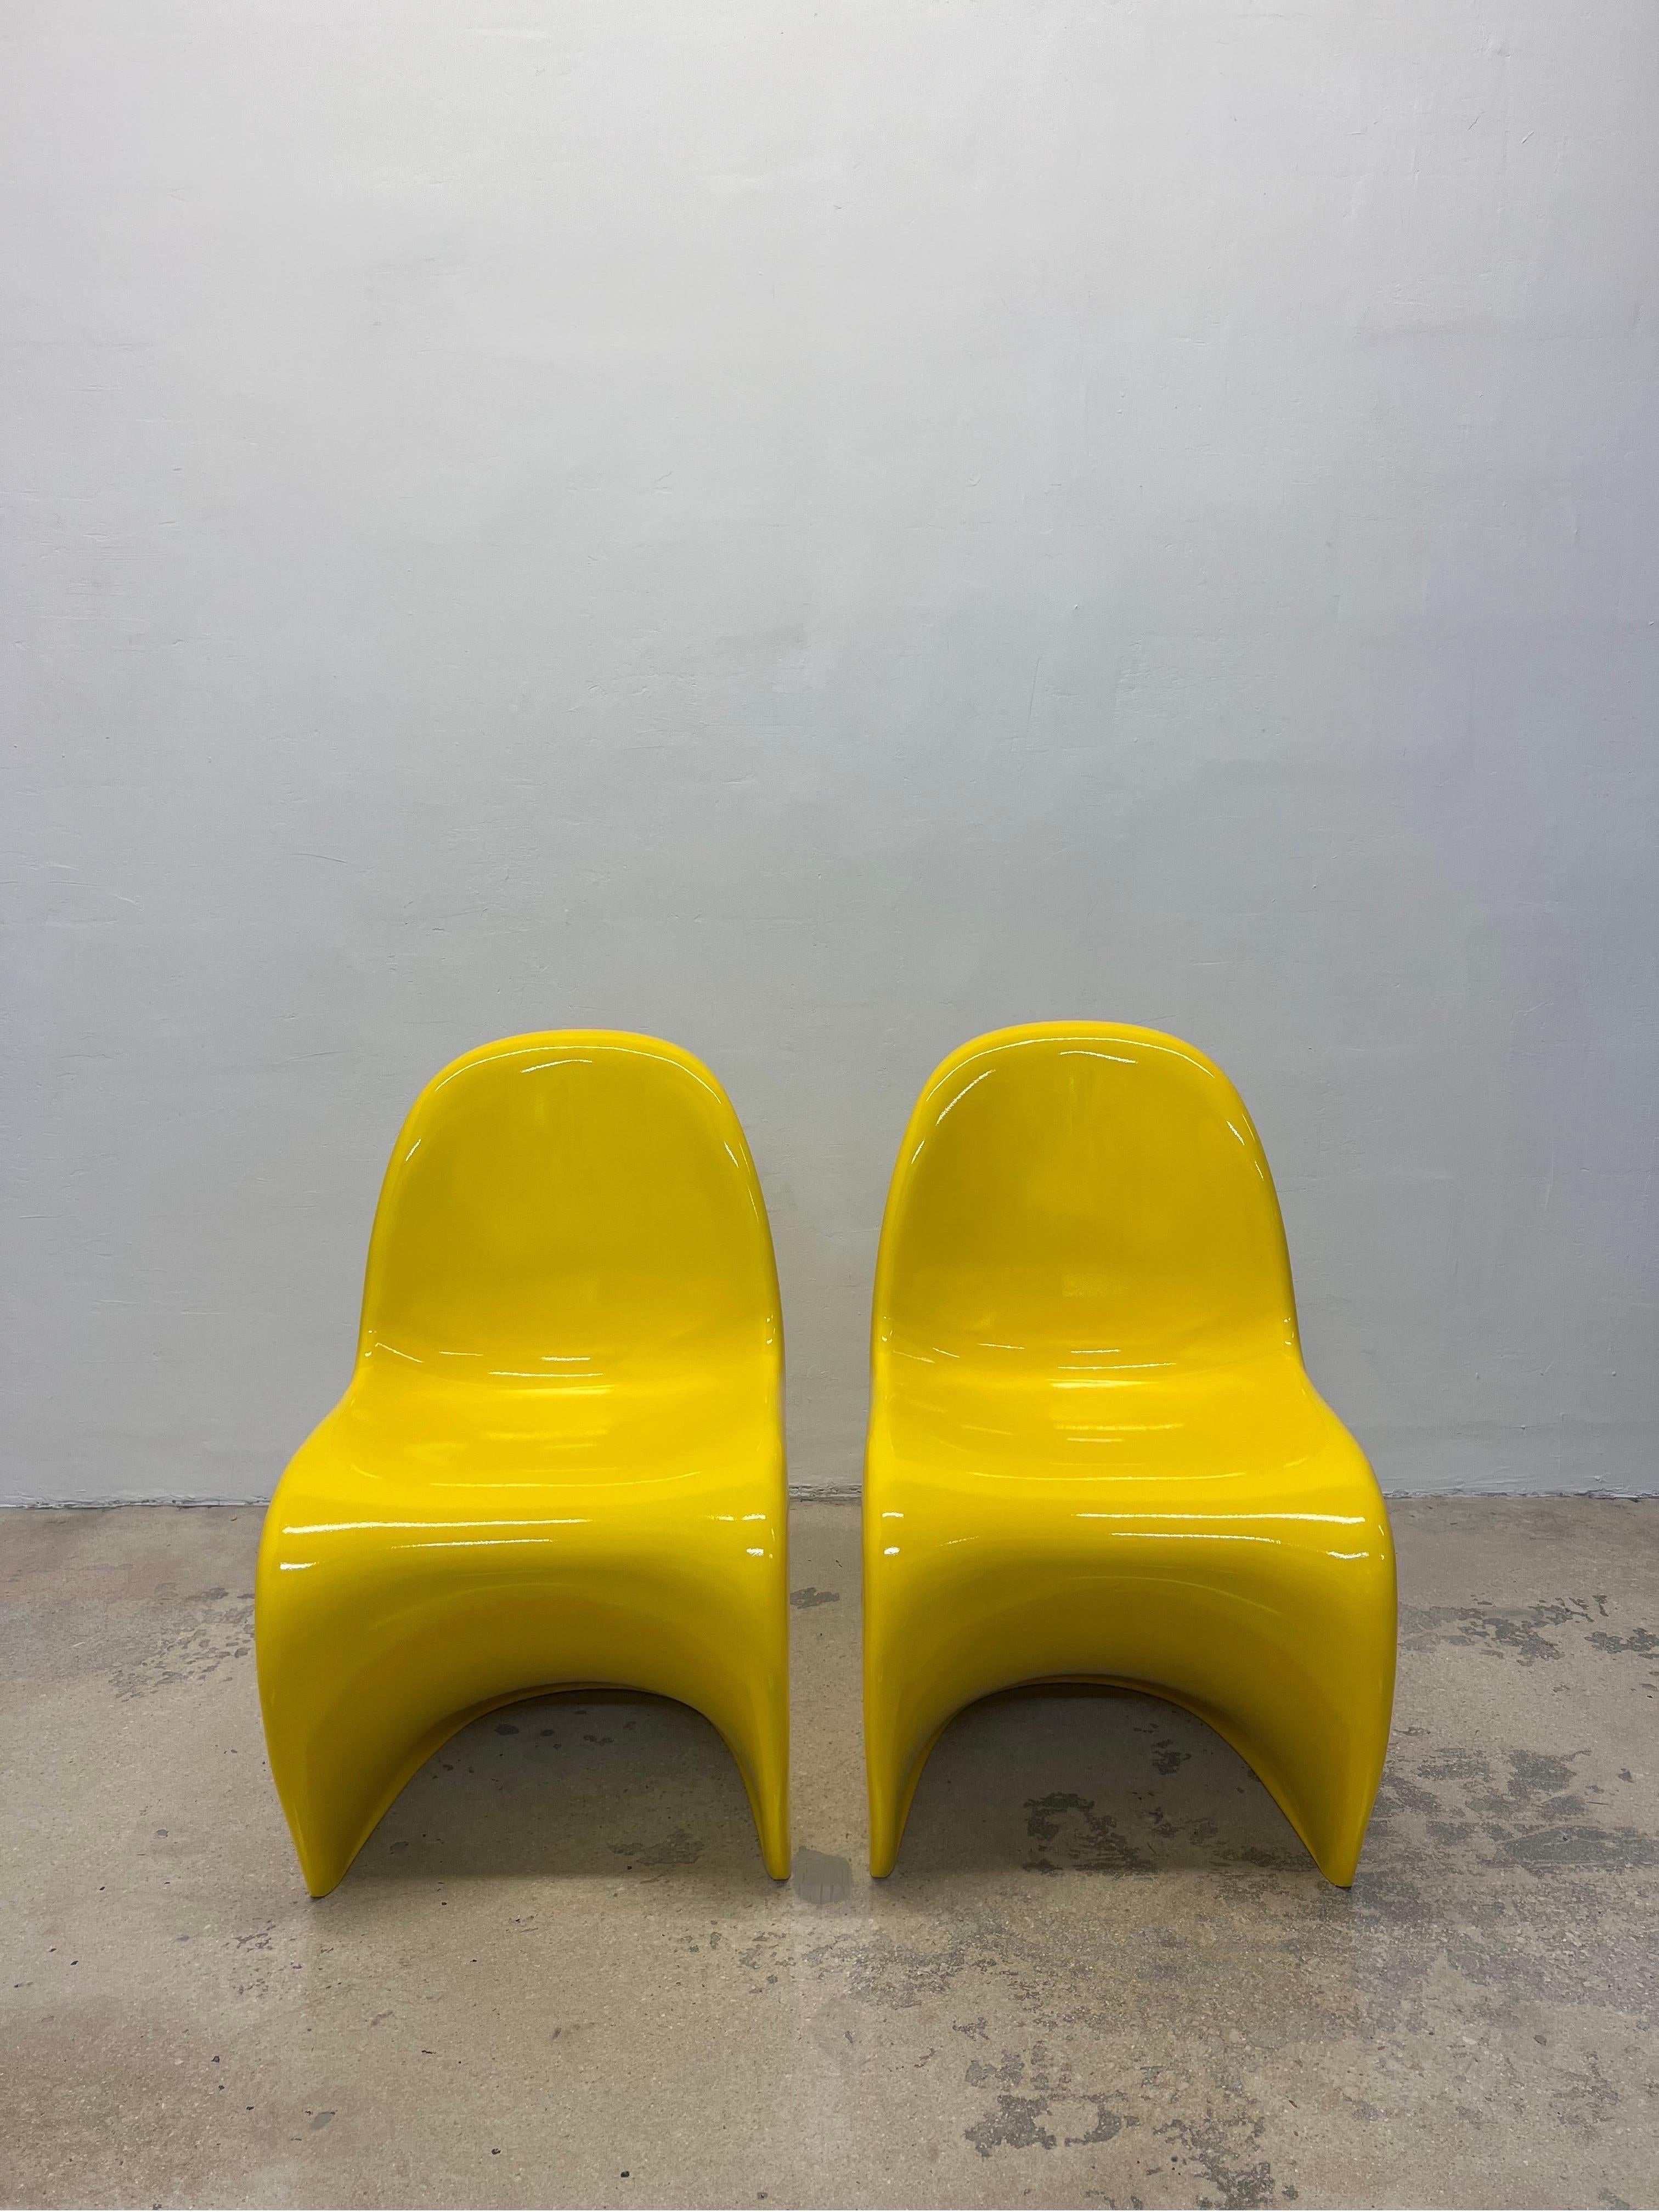 Second generation S chairs rendered in molded Polyurethane rigid foam and re-finished in bright sunshine yellow lacquer. Originally designed by Verner Panton in the 1960s, this pair was manufactured by Vitra in the early 1990s.